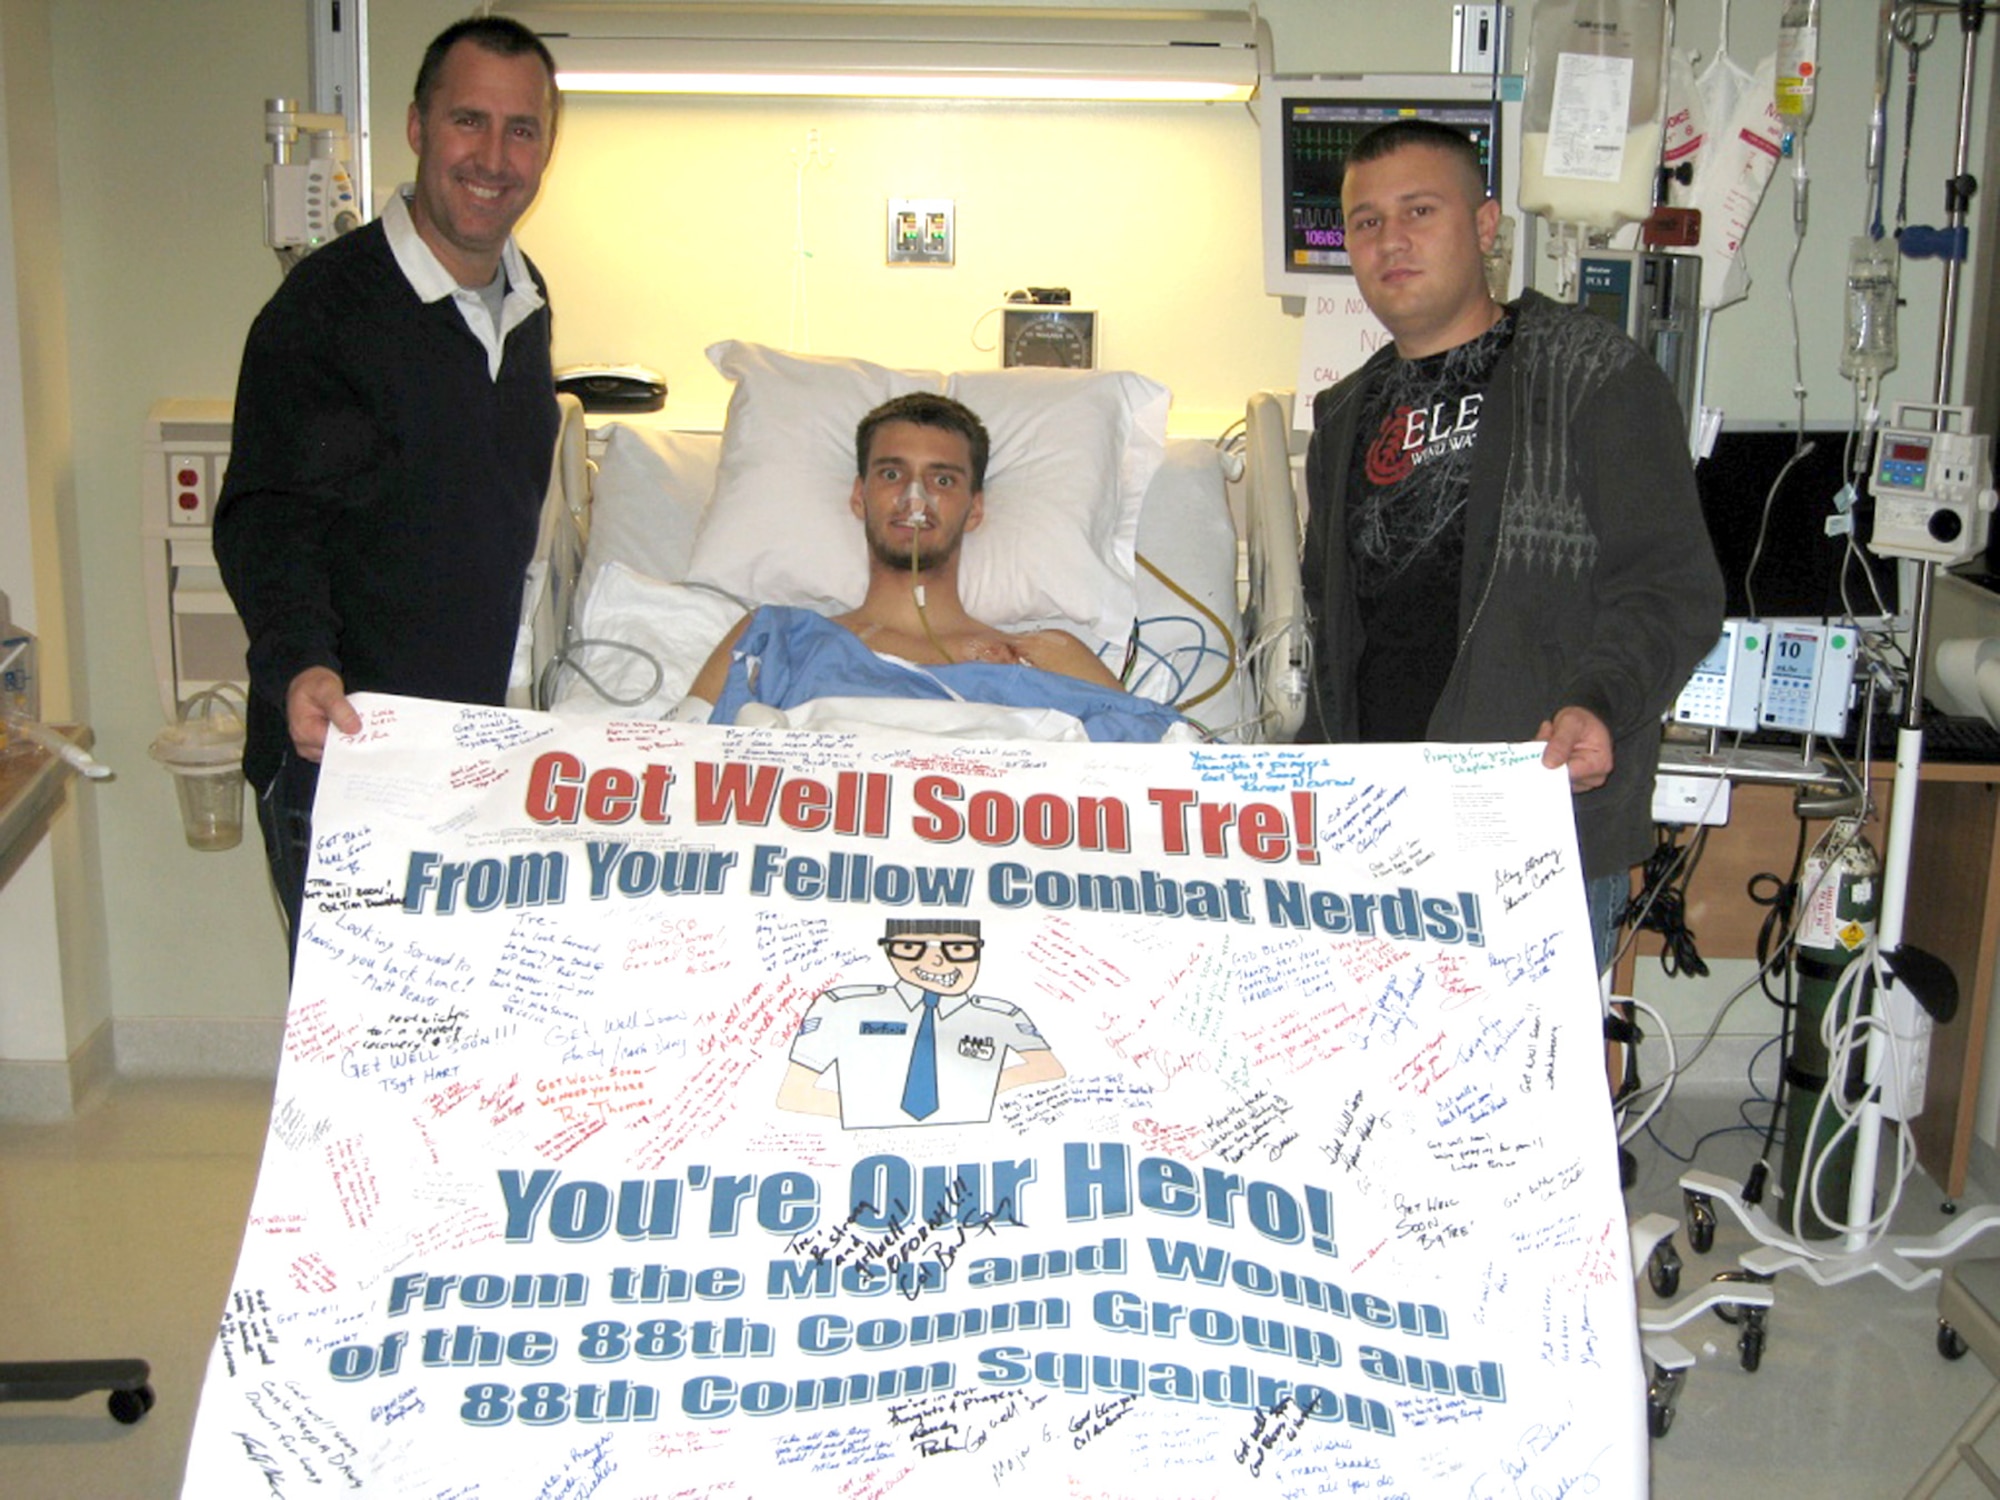 Senior Airman Tre Porfirio poses with Lt. Col. Rick Johns and Senior Airman Scott Cross in his recovery room at Walter Reed Army Medical Center, Md., after receiving 11 surgeries to reconstruct his abdomen. While serving with an Army unit in Afghanistan, Airman Porfirio was shot three times in the back by an insurgent Nov. 21. Airmen Porfirio and Cross are assigned to the 88th Communications Squadron at Wright-Patterson Air Force Base, Ohio. Colonel Johns is the 88th CS commander. 